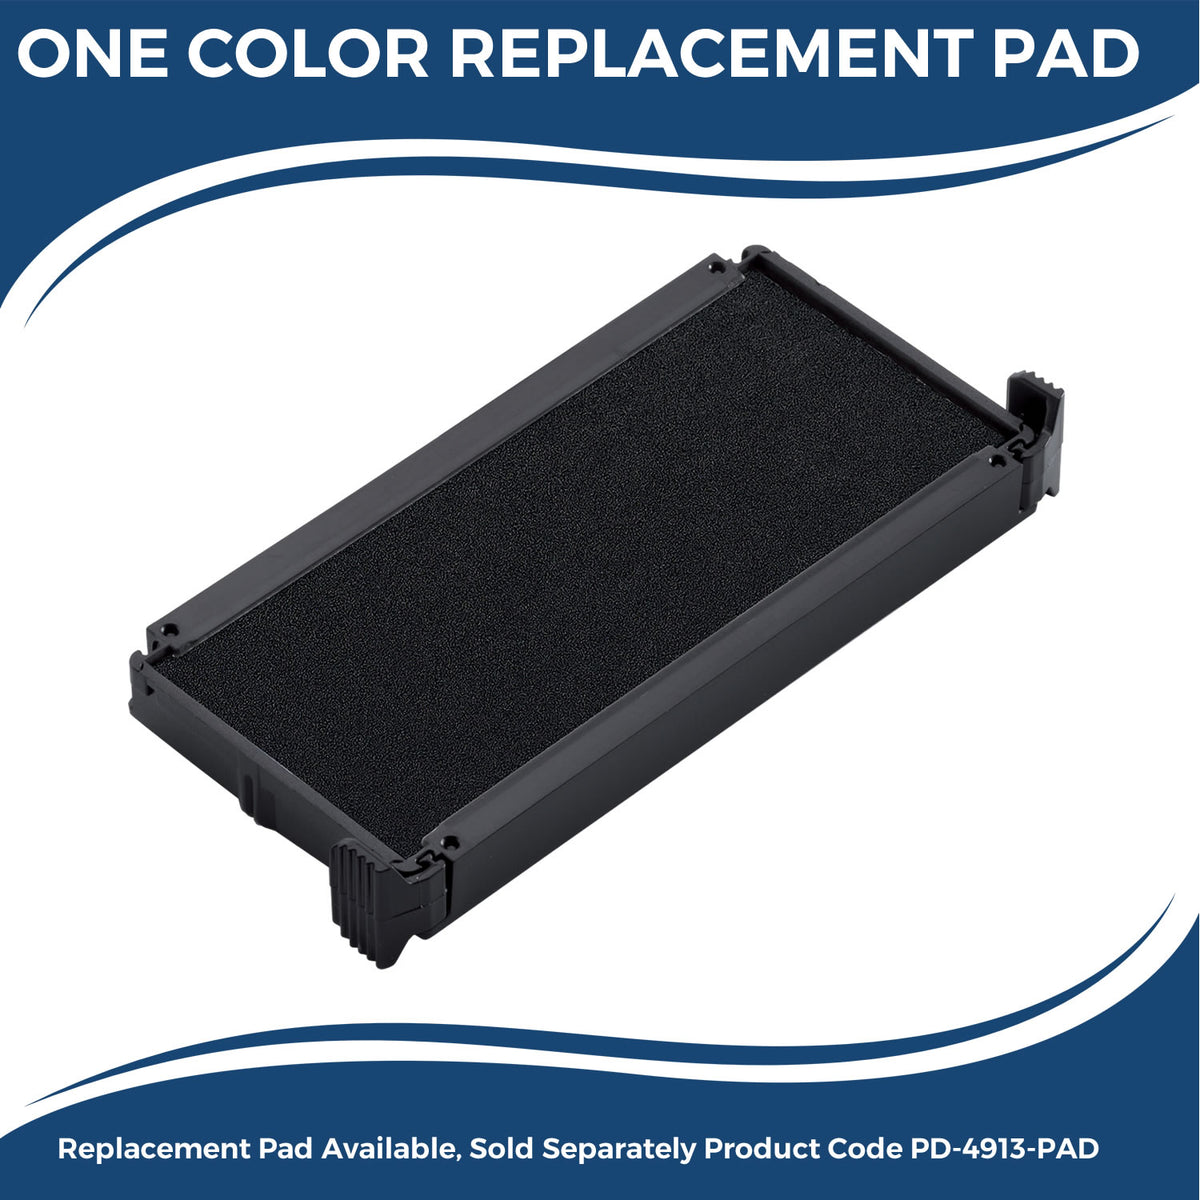 Large Self Inking Hold Notice Stamp 4571S Large Replacment Pad